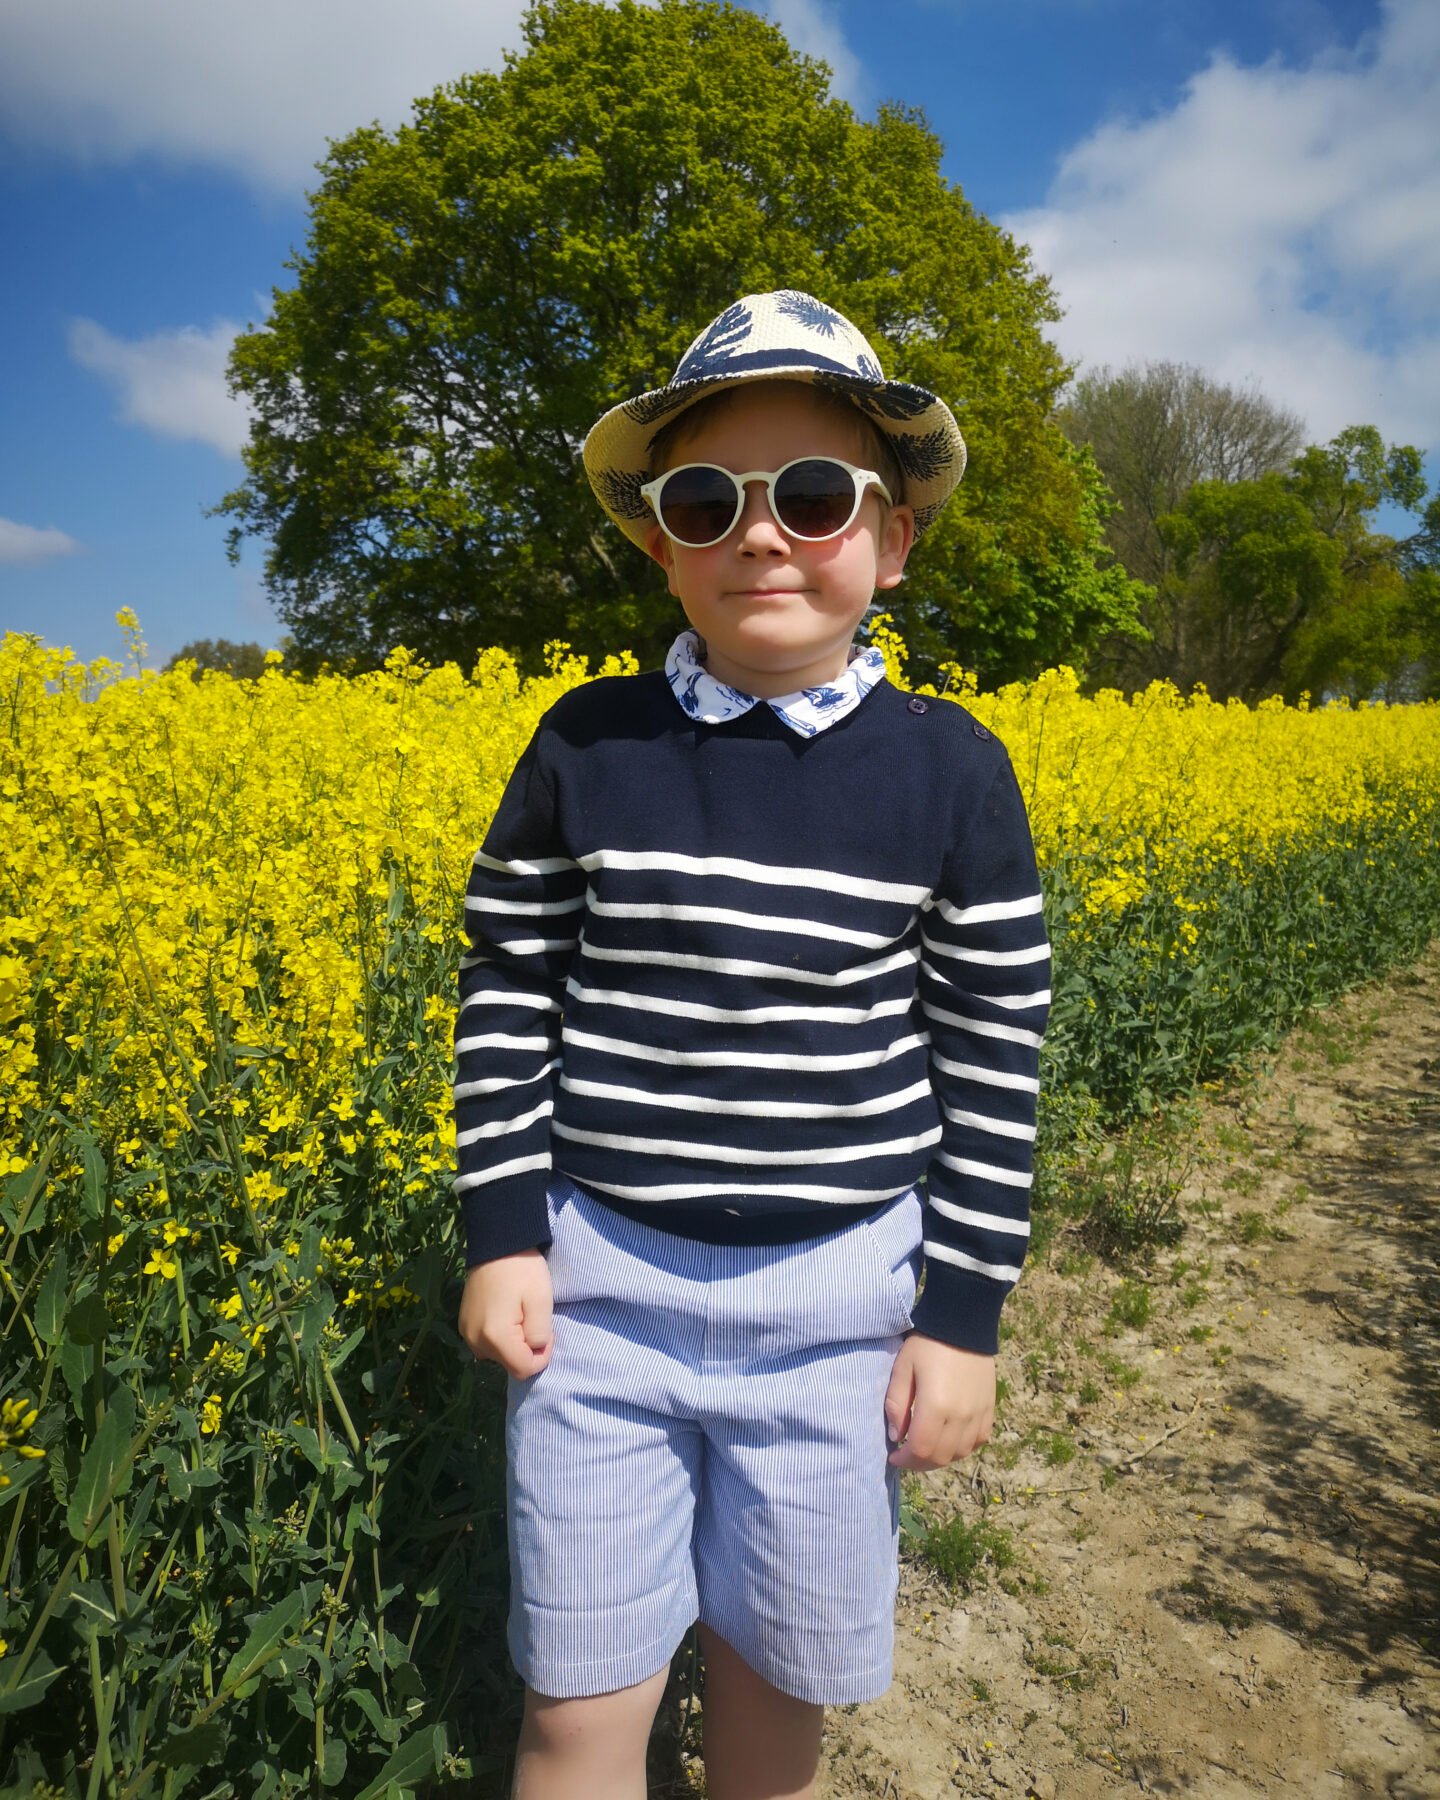 Rachel Riley SS22, SS22 Collection, Baba Fashionista, Luxury Childrenswear, British Designer, Rachel Riley Clothing, Vintage Vibes, Kidswear, The Frenchie Mummy, Blog Anniversary Giveaway, Win